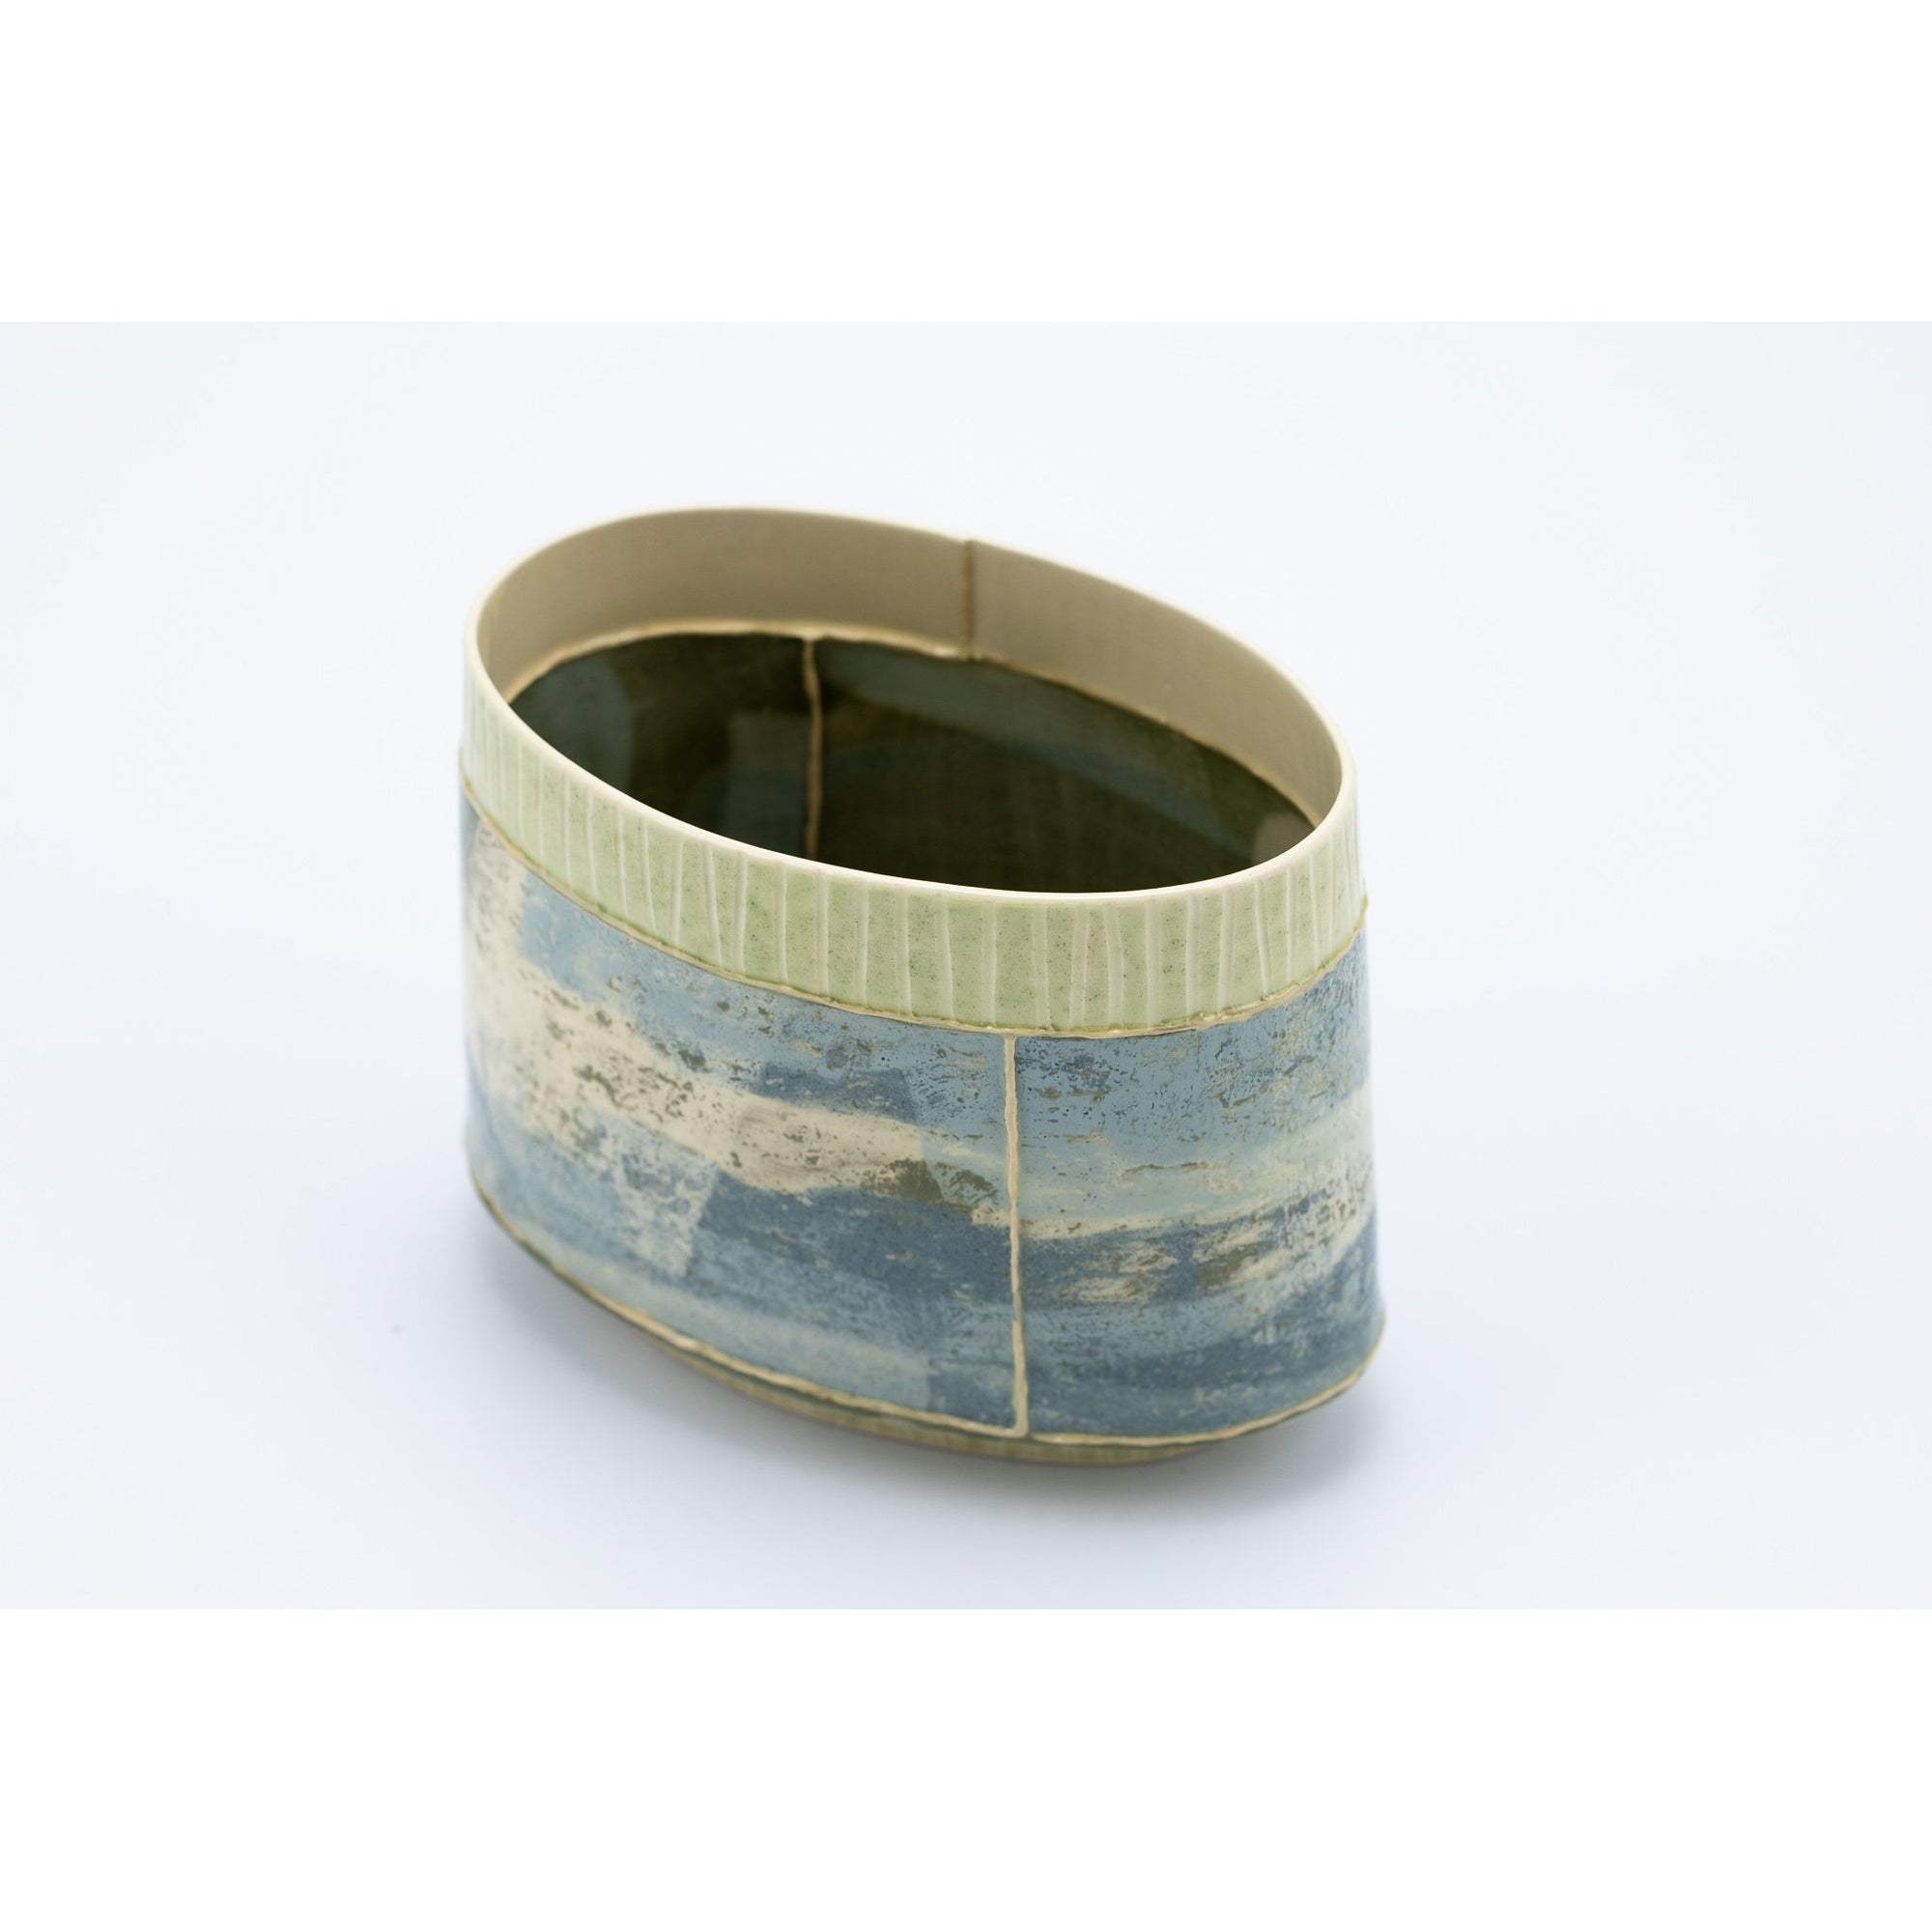 Small Oval Vessel (SO69) | Green Stripe | handbuilt ceramic created by Emily-Kriste Wilcox, available from Padstow Gallery, Cornwall